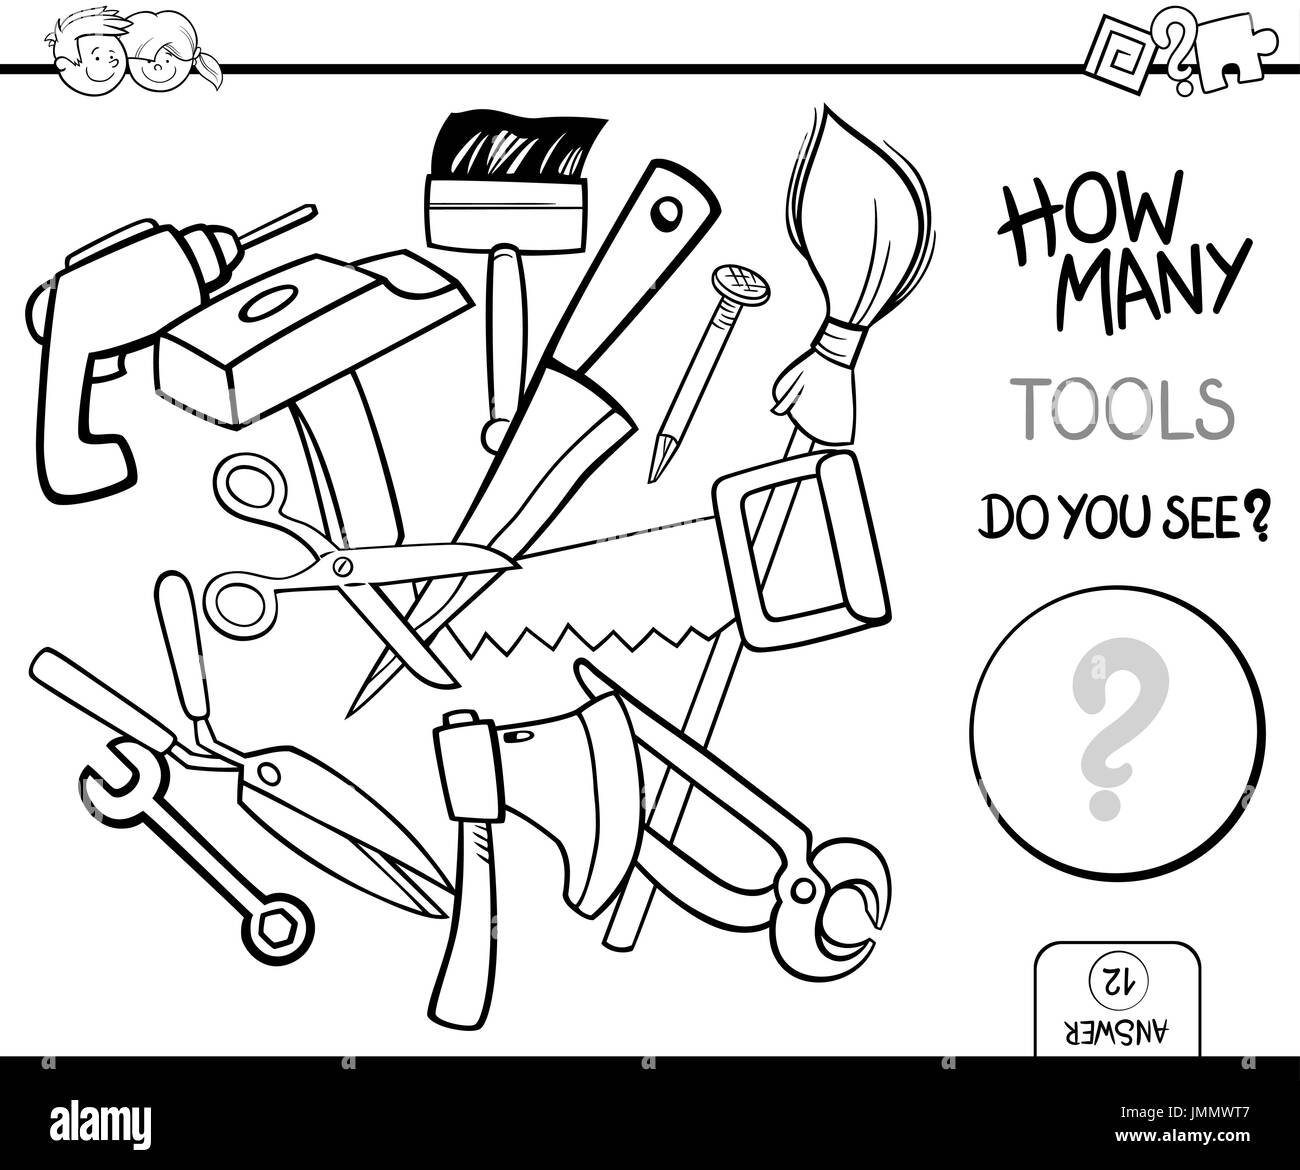 Black and White Cartoon Illustration of Educational Counting Activity Game for Children with Tools Objects Coloring Page Stock Vector